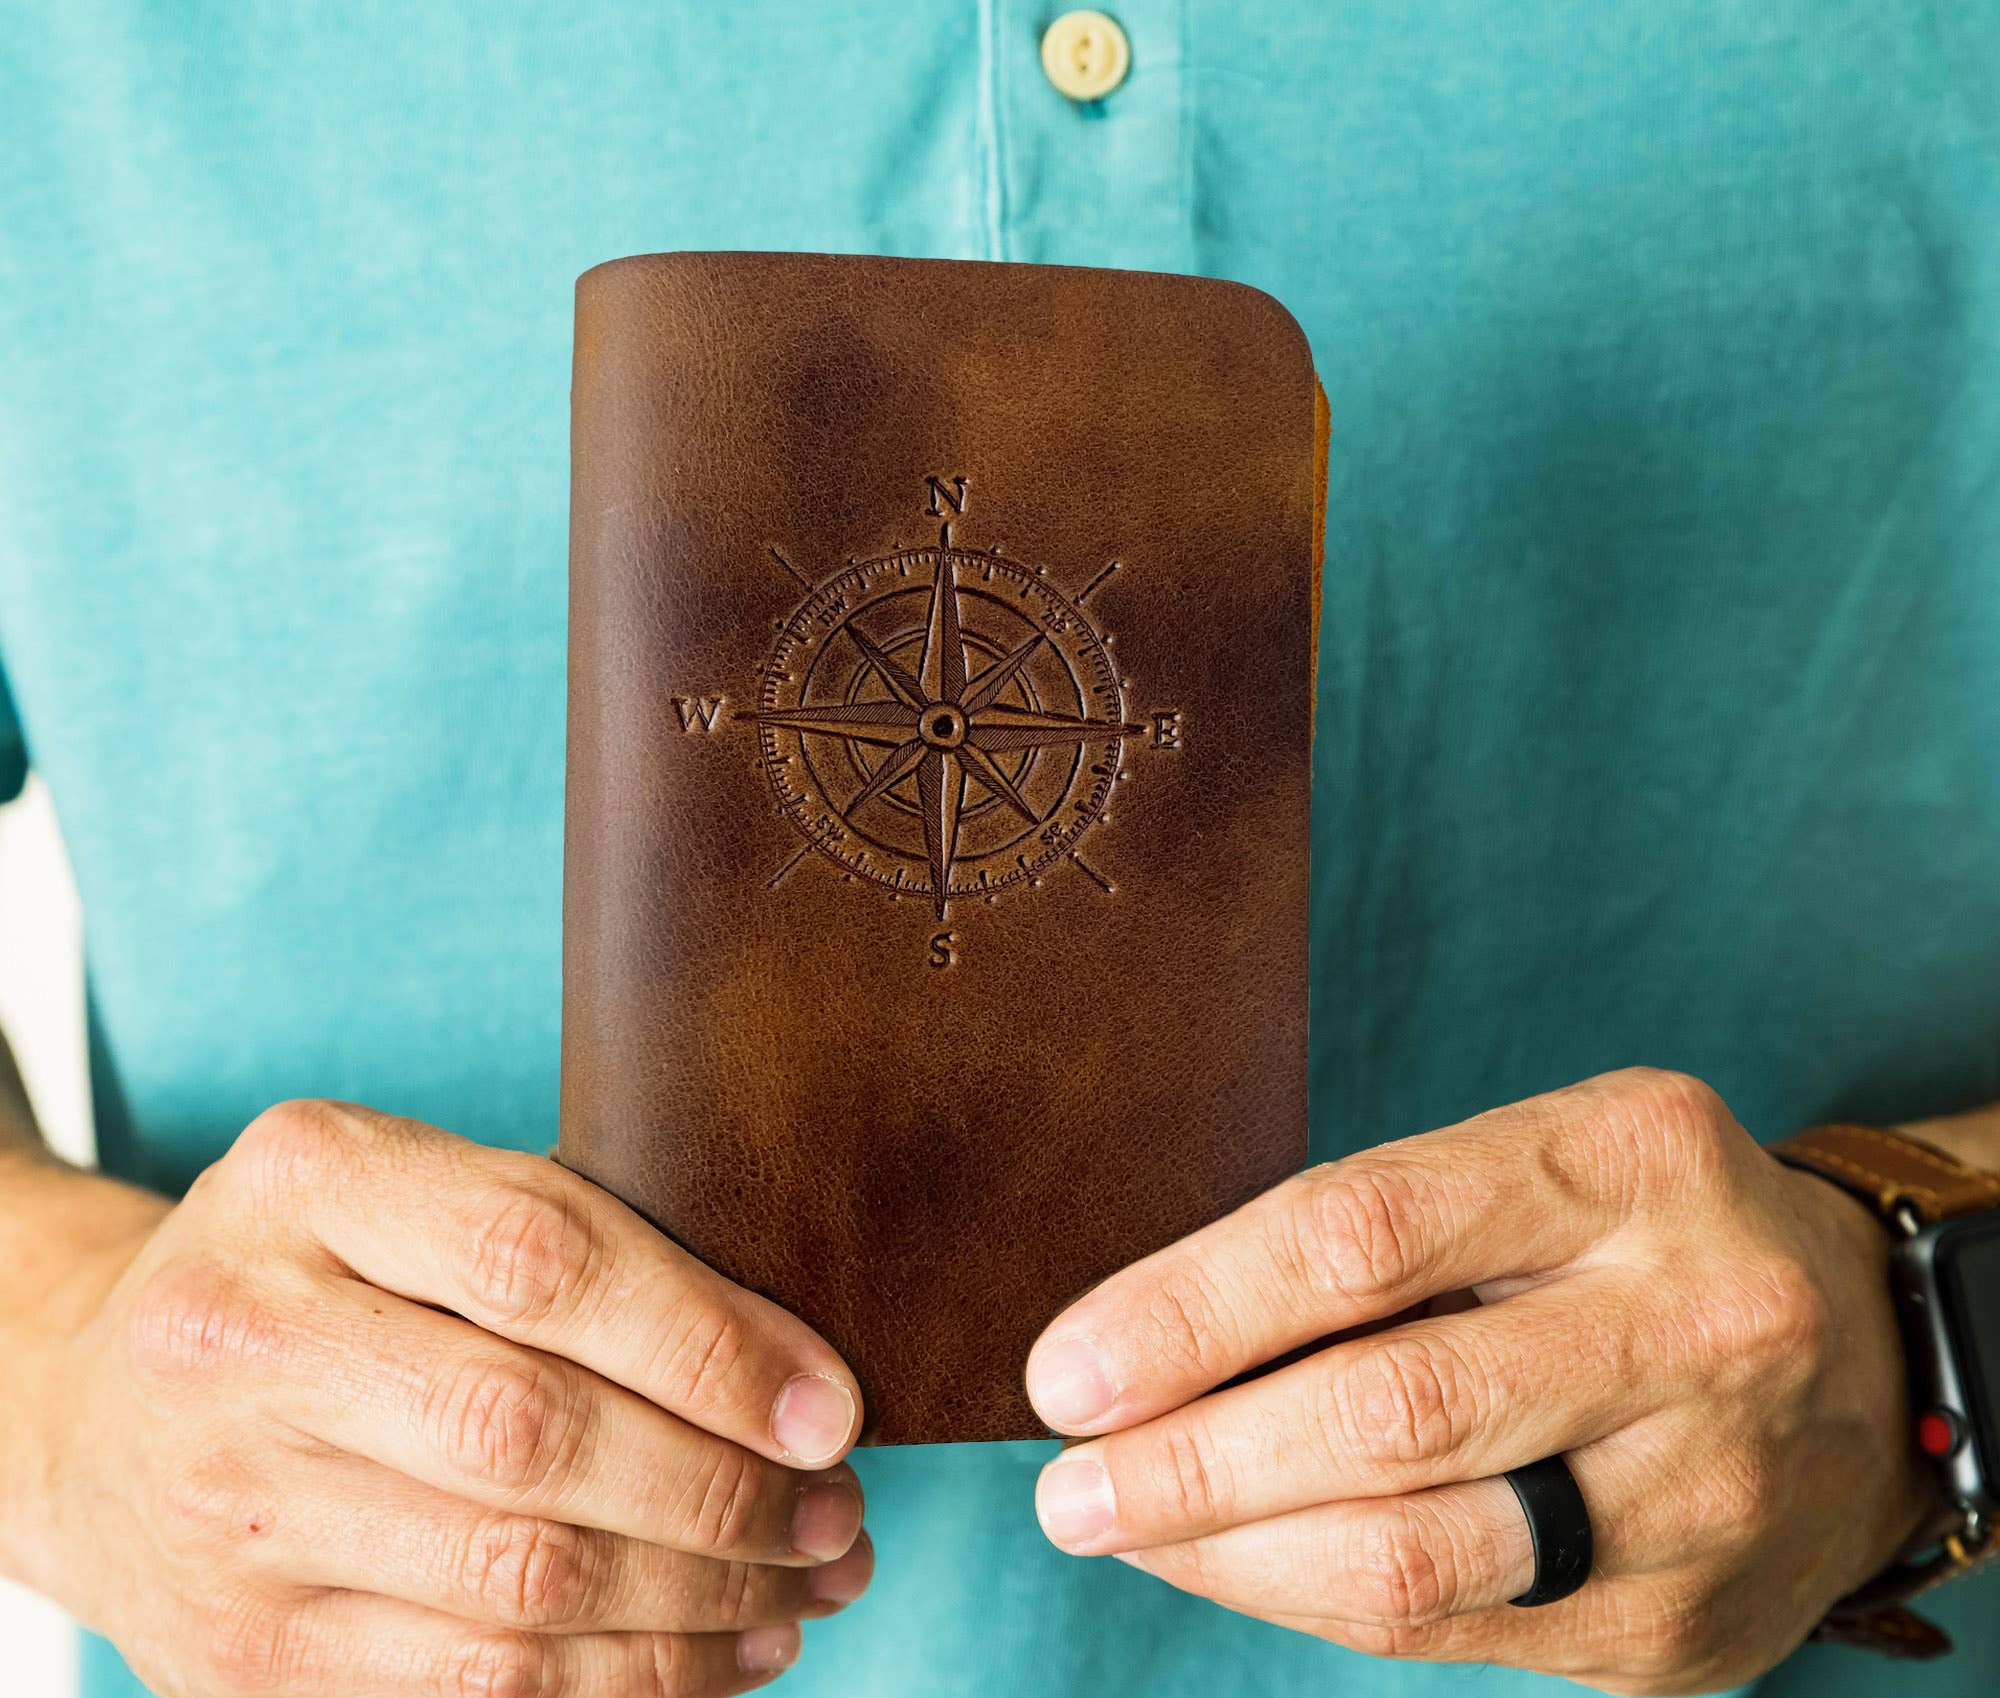 Man holding leather journal in desert sand color.